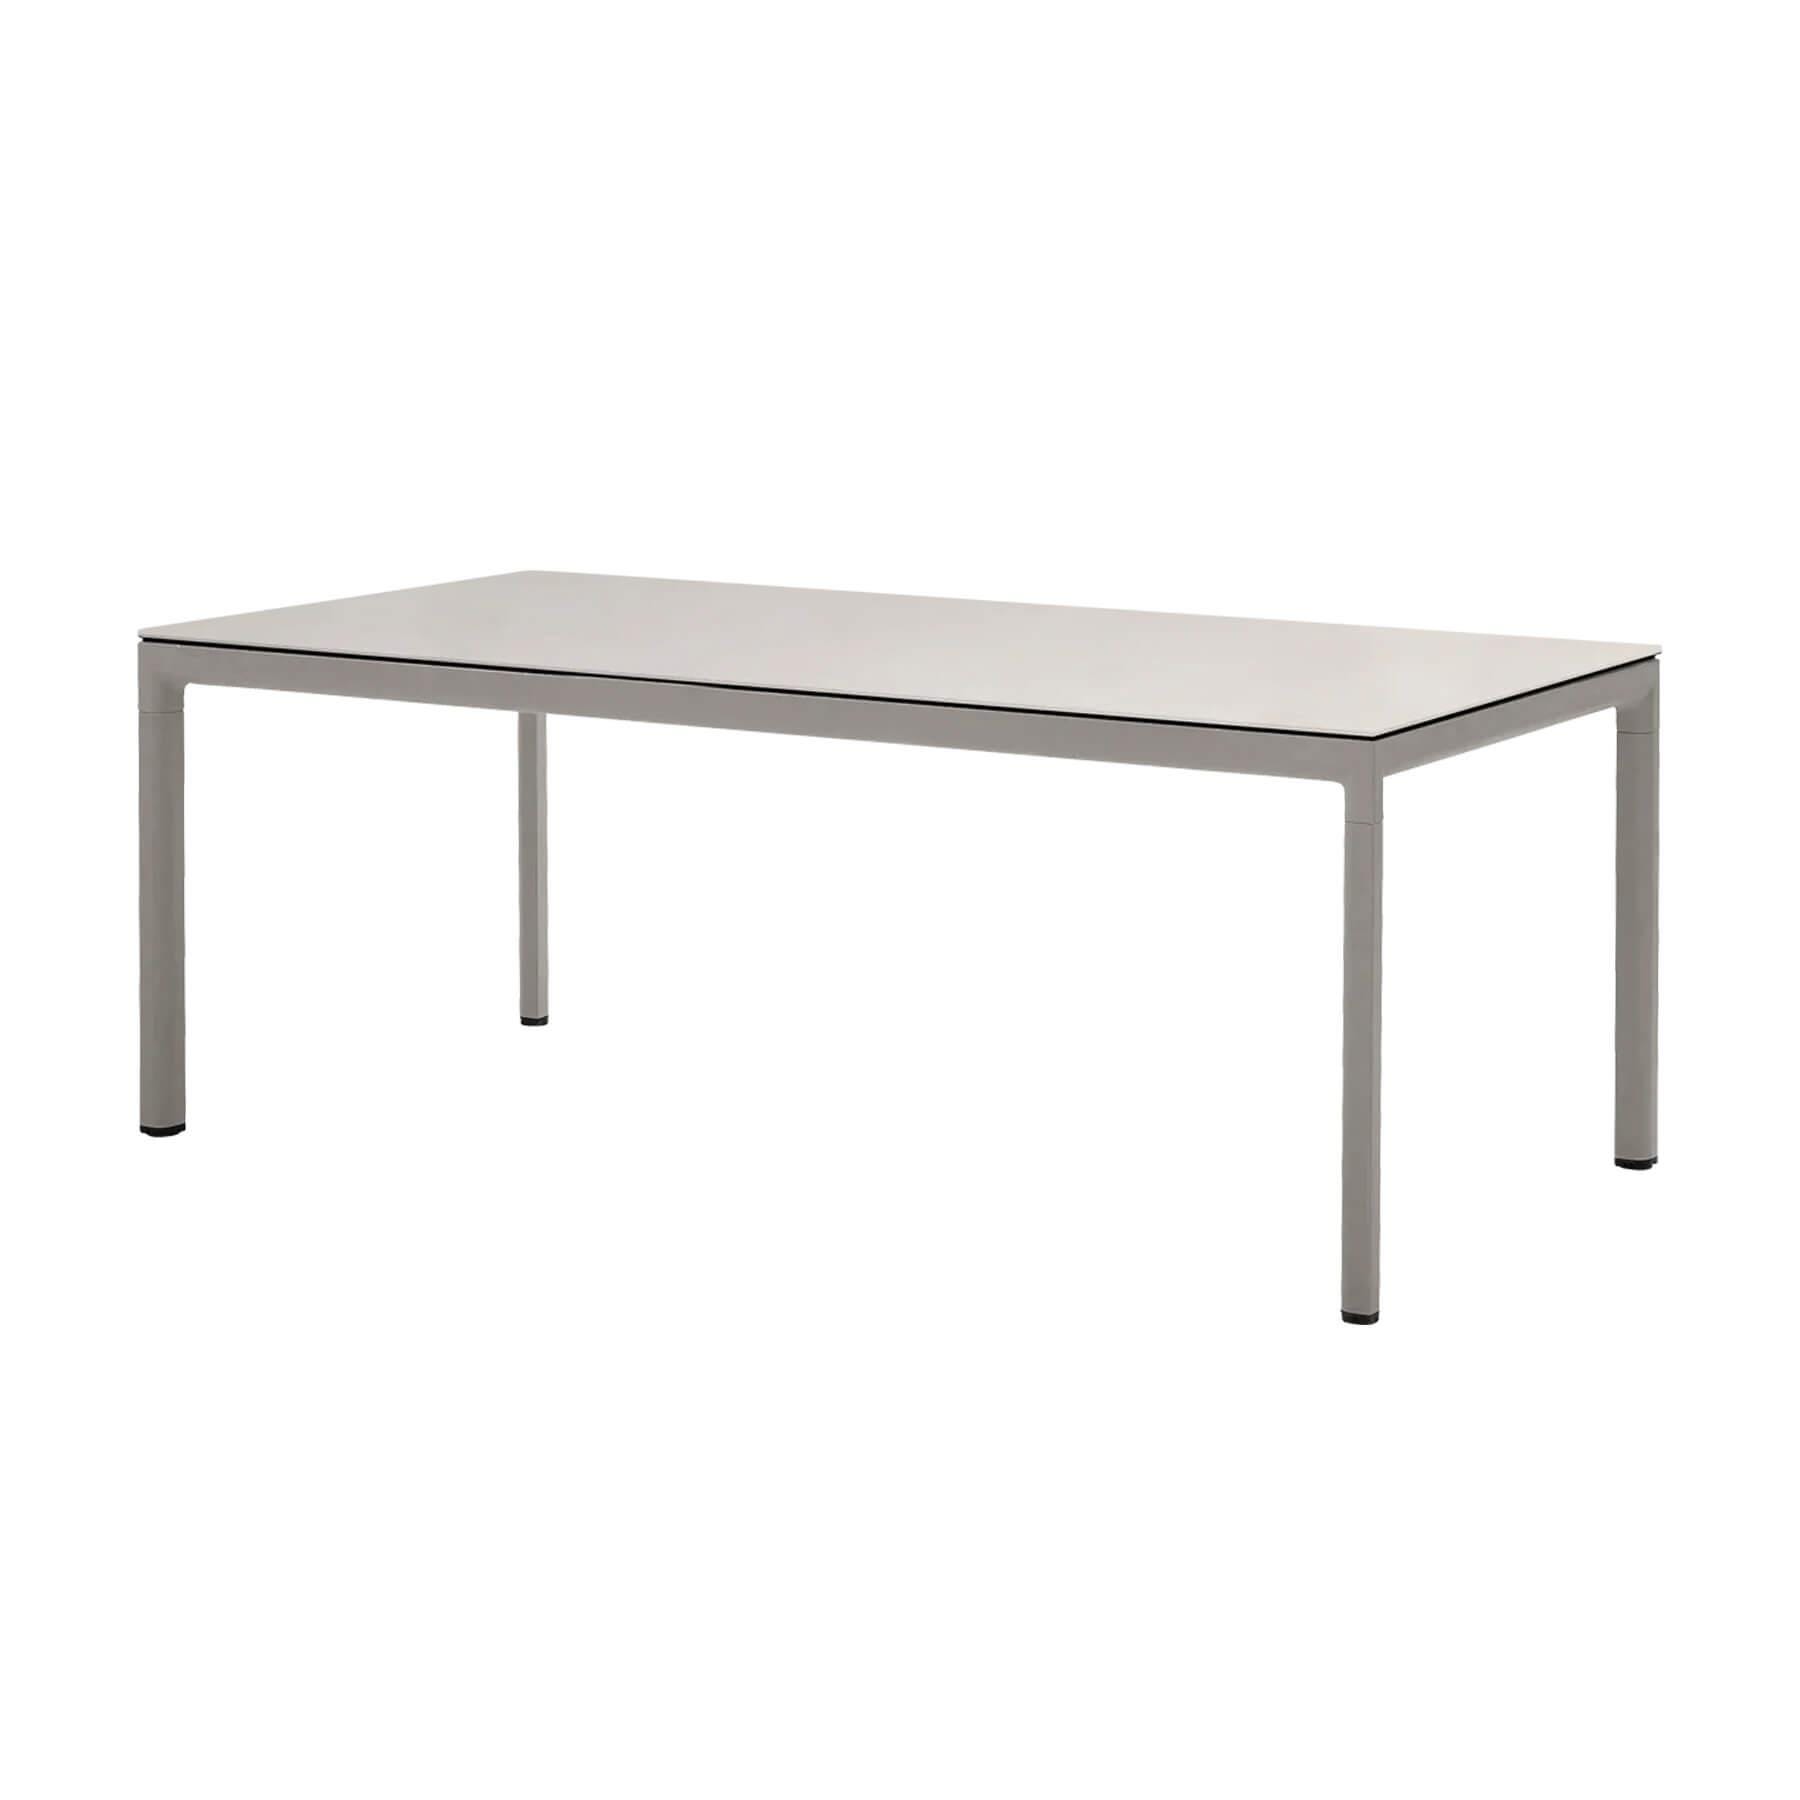 Caneline Drop Outdoor Dining Table Ceramic Toscana Sand Top Taupe Legs Grey